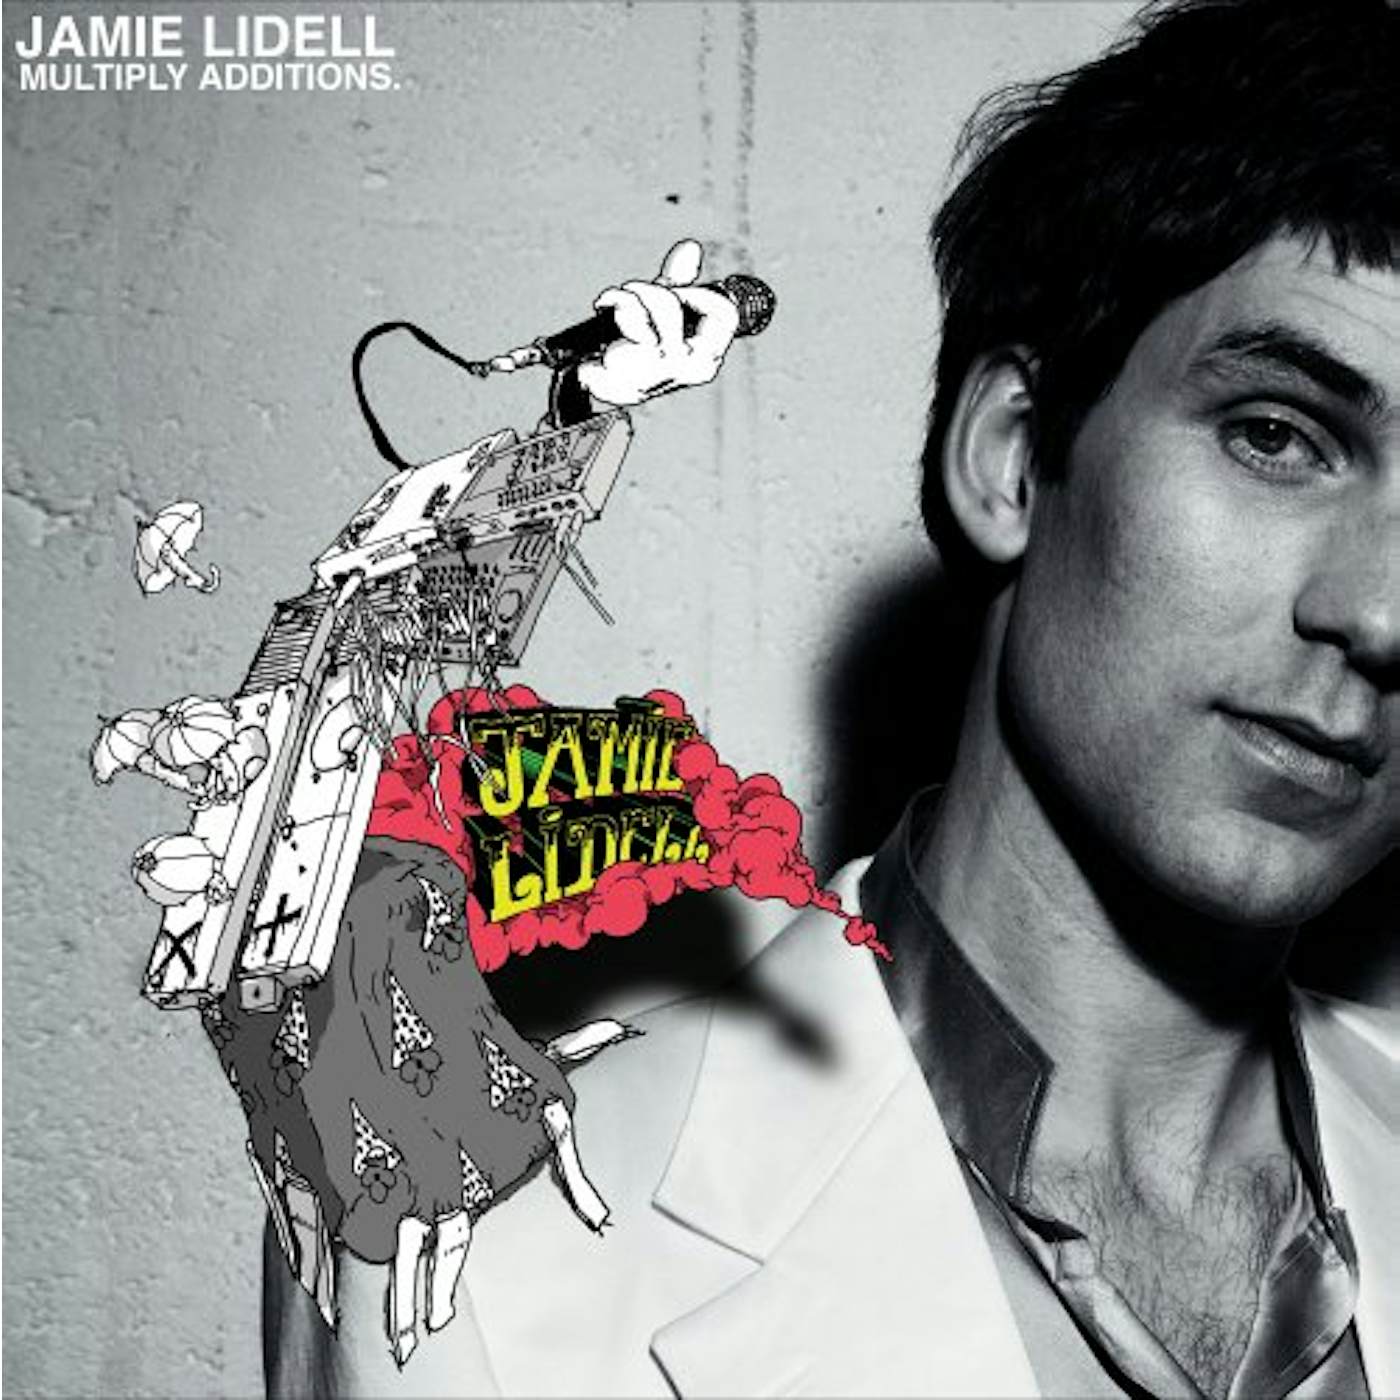 Jamie Lidell MULTIPLY ADDITIONS CD